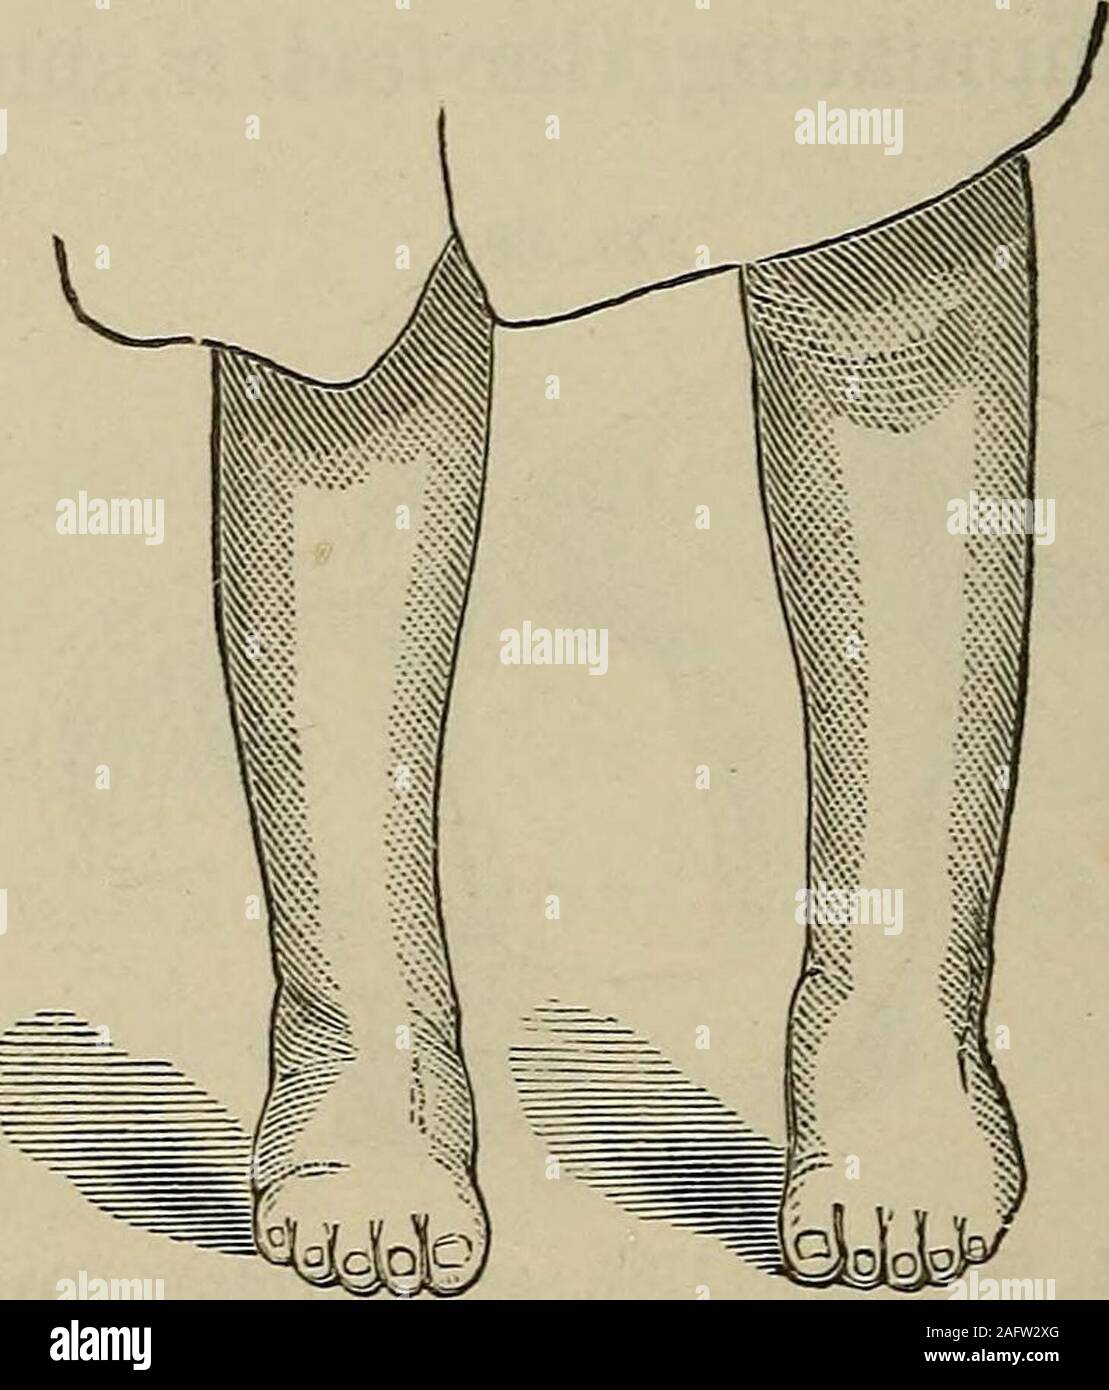 A Practical Manual Of The Treatment Of Club Foot C M September 1870 Aged Seventeen Days Being Satisfied That Deformity Was Of Paralyticorigin I Dressed Them With Neils Foot Board Asdescribed Page 39